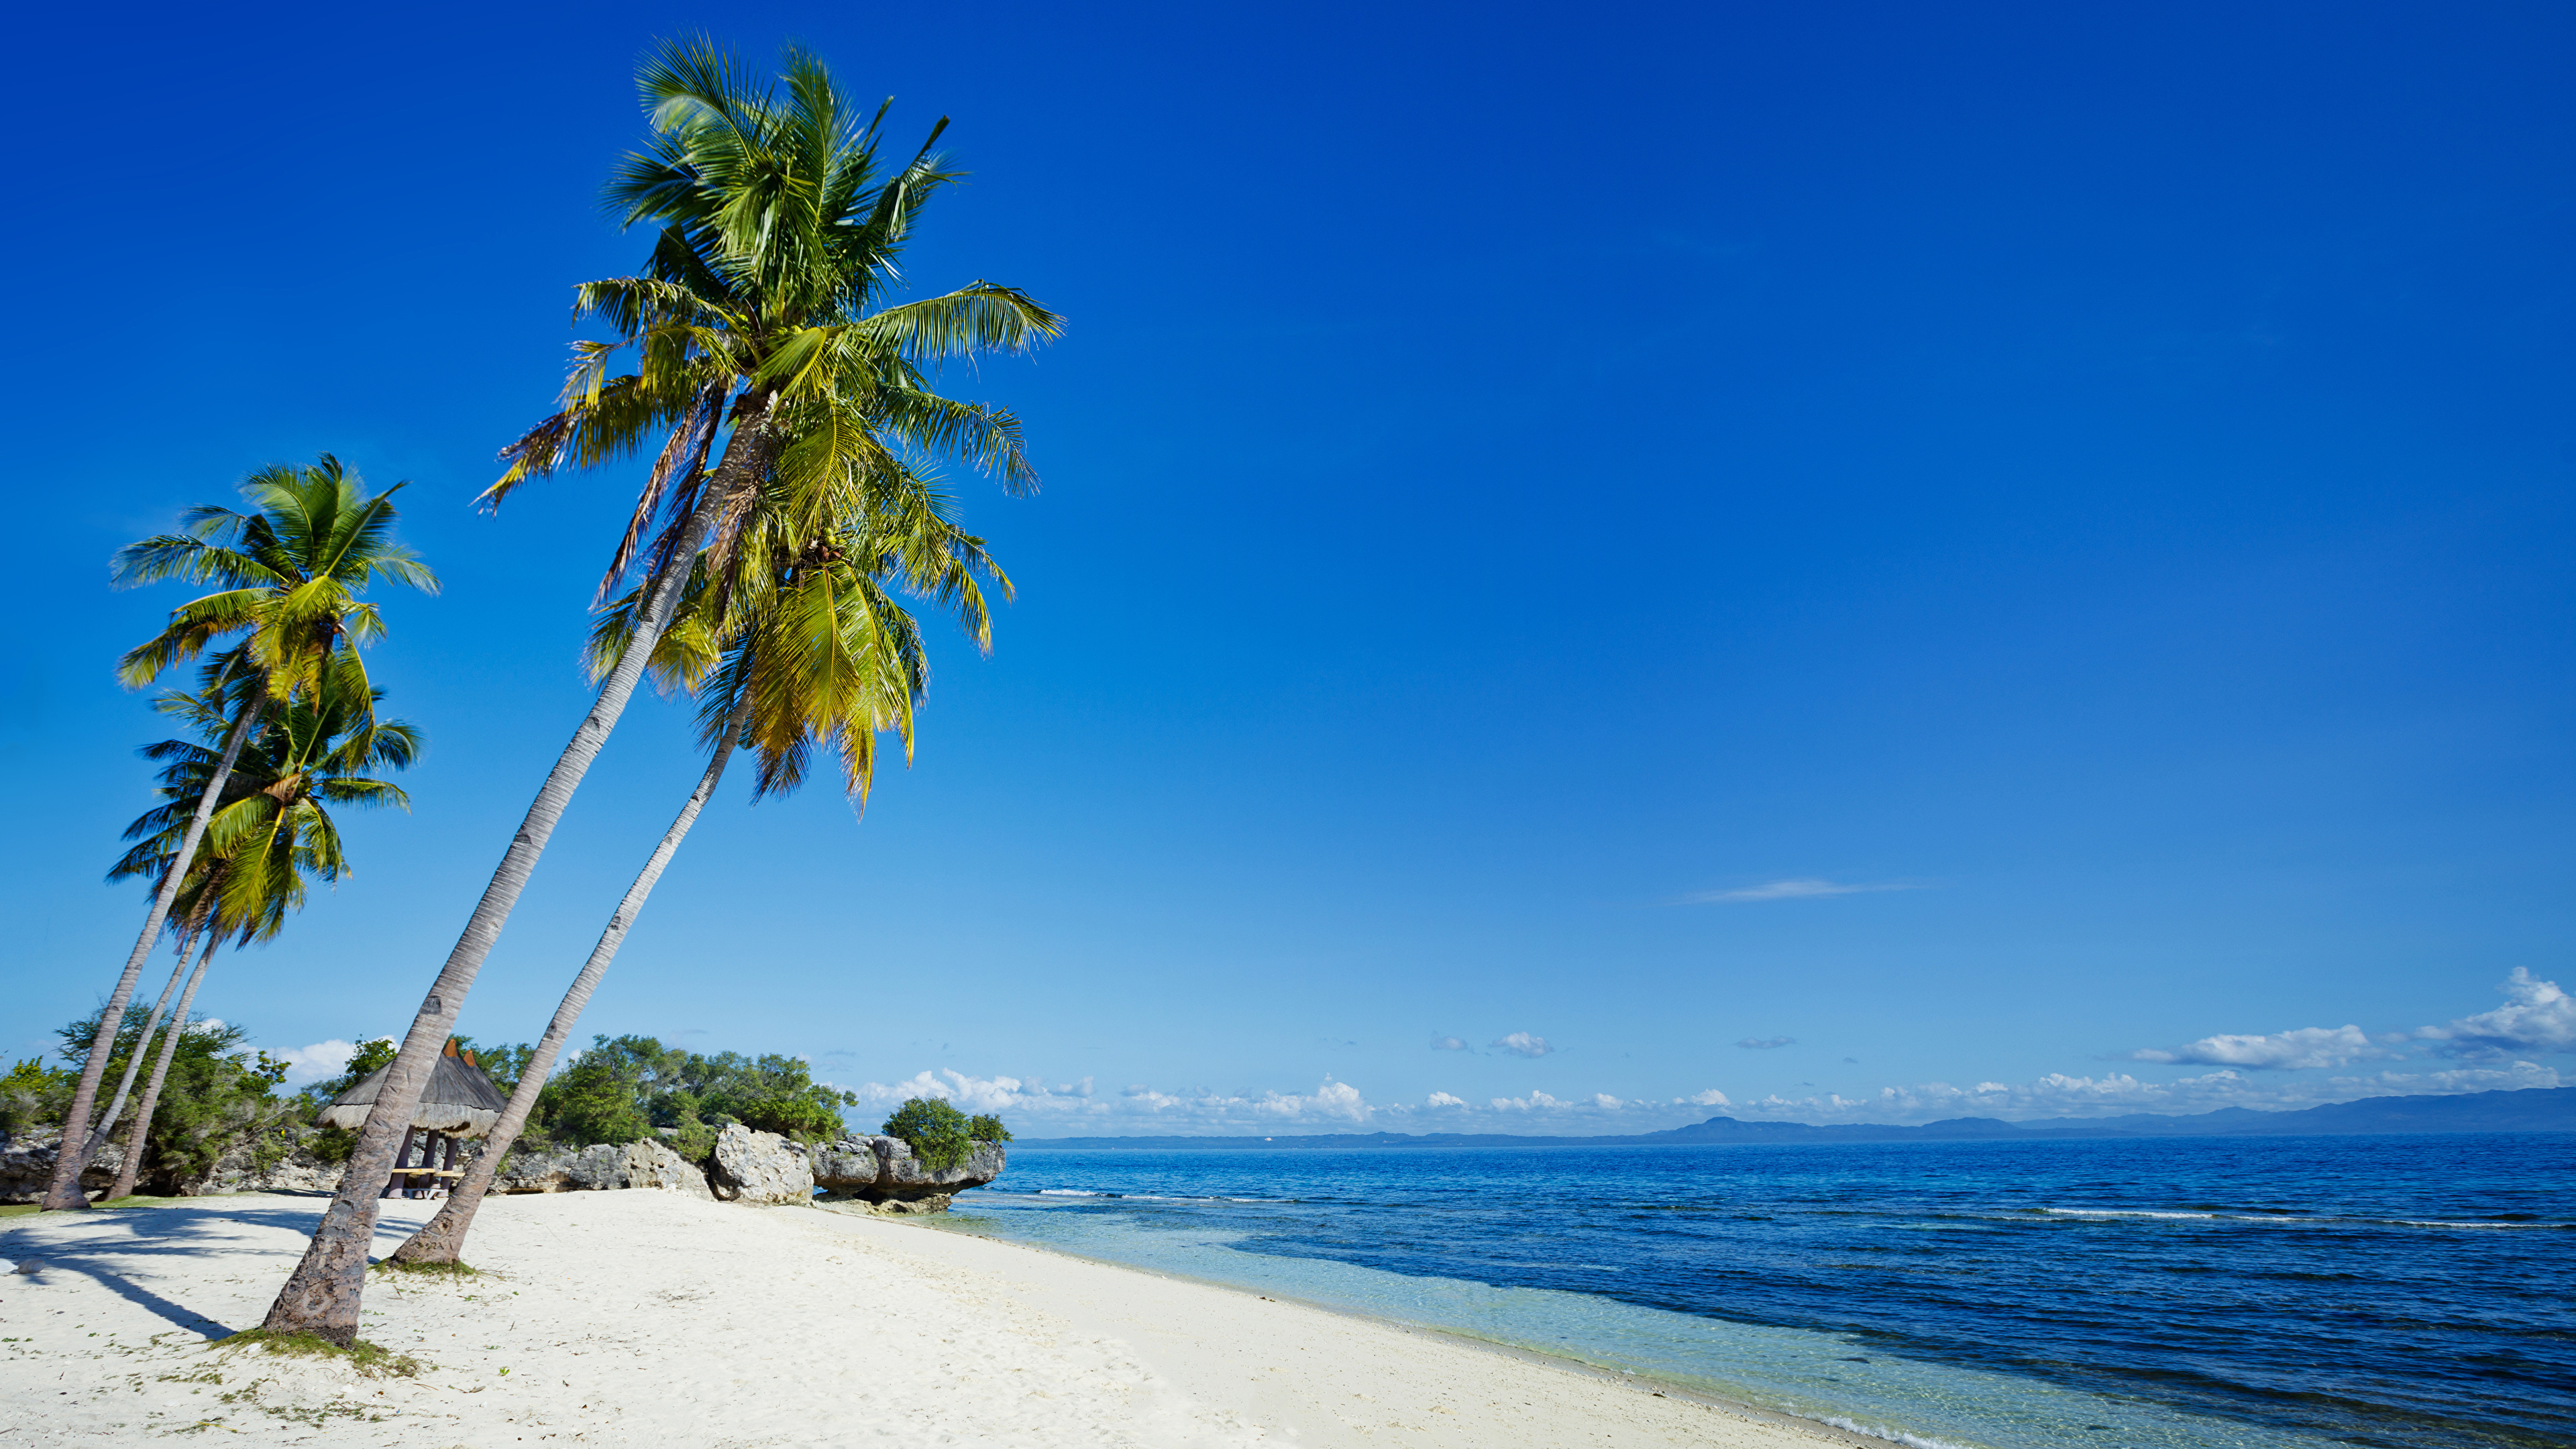 Philippines beaches, Stunning wallpapers, Michelle Sellers, Tropical paradise, 3840x2160 4K Desktop